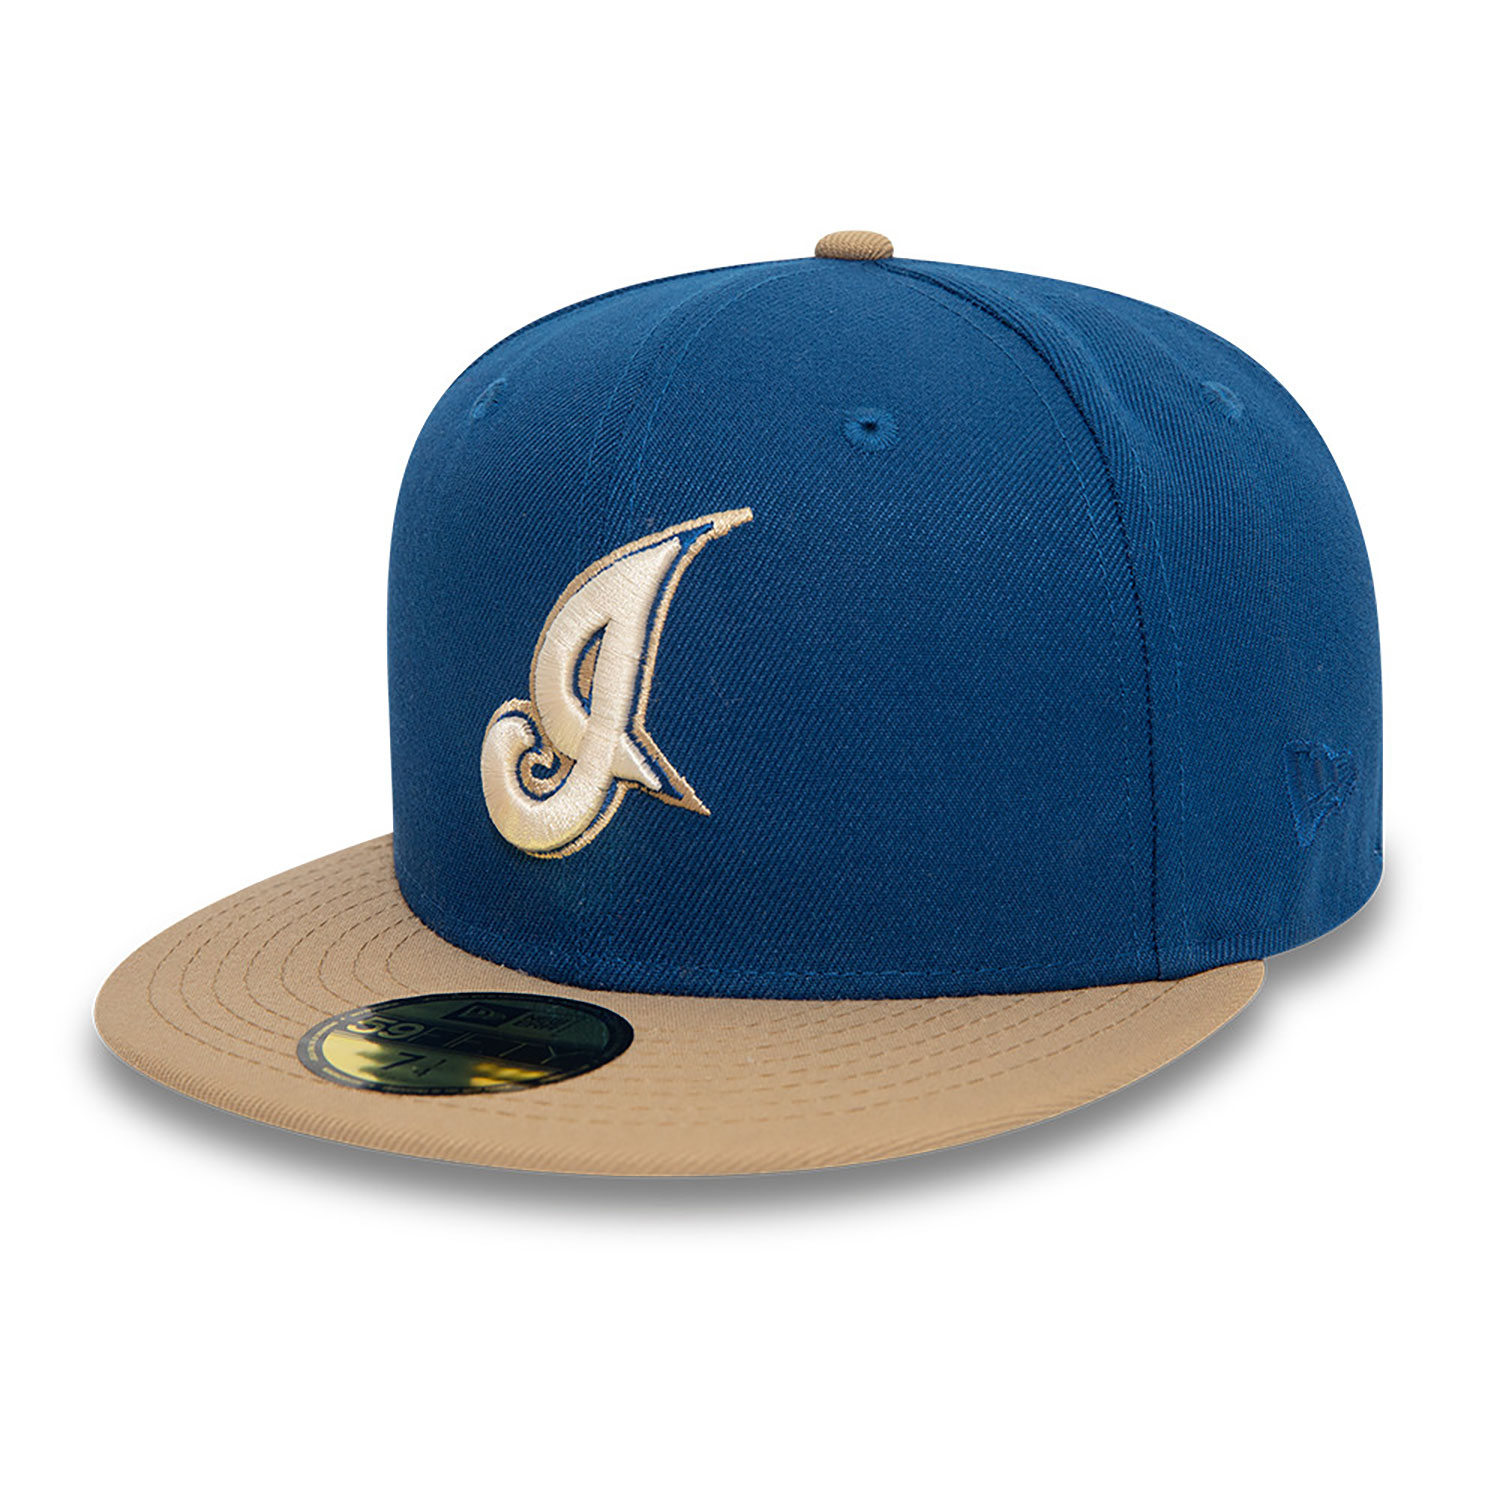 Cleveland Indians Alternate Logo Blue 59FIFTY Fitted Cap